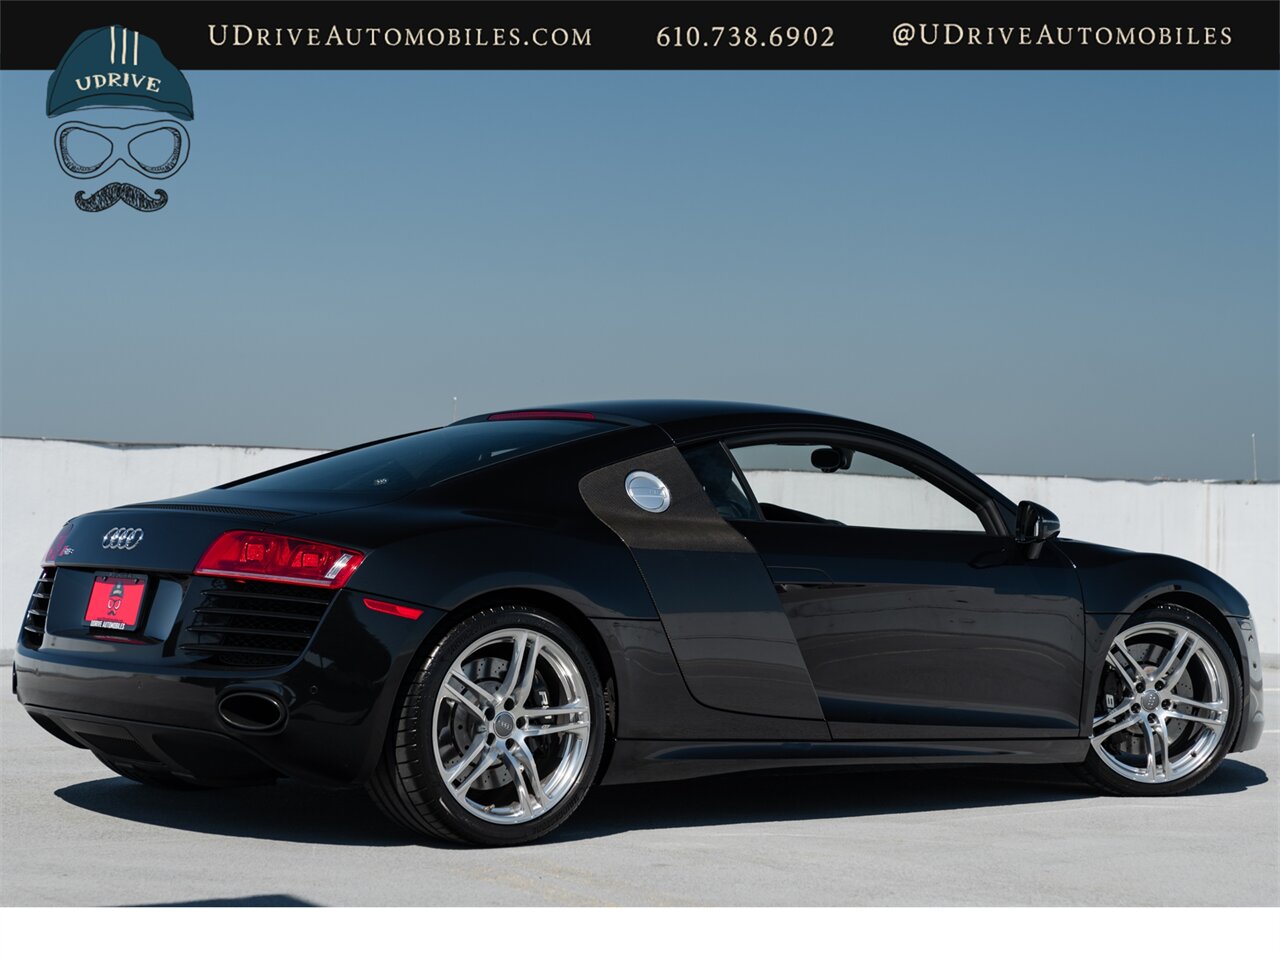 2009 Audi R8 Quattro  4.2L V8 6 Speed Manual - Photo 2 - West Chester, PA 19382